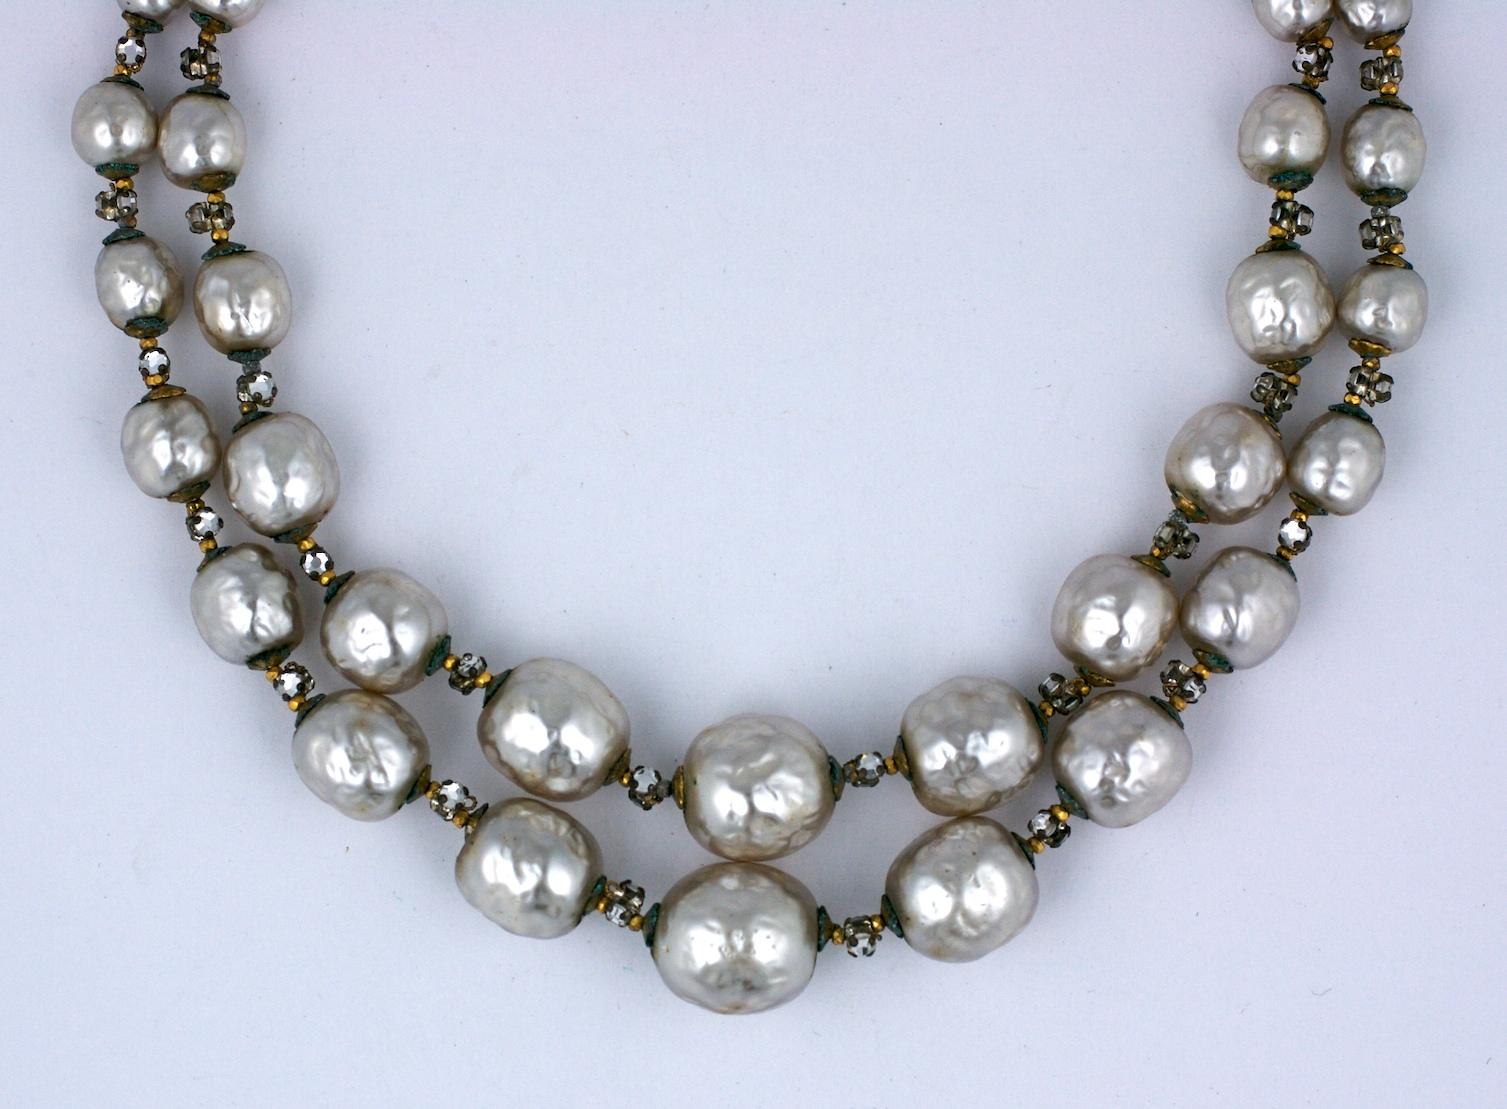 Miriam Haskell Rose Montee and Graduated Pearl Necklace. Lovely signature Miriam Haskell graduated faux pearls with crystal rose montees hand sewn between each pearl. Great creamy color. Signature Miriam Haskell diamonte sewn clasp.
Signed on clasp.